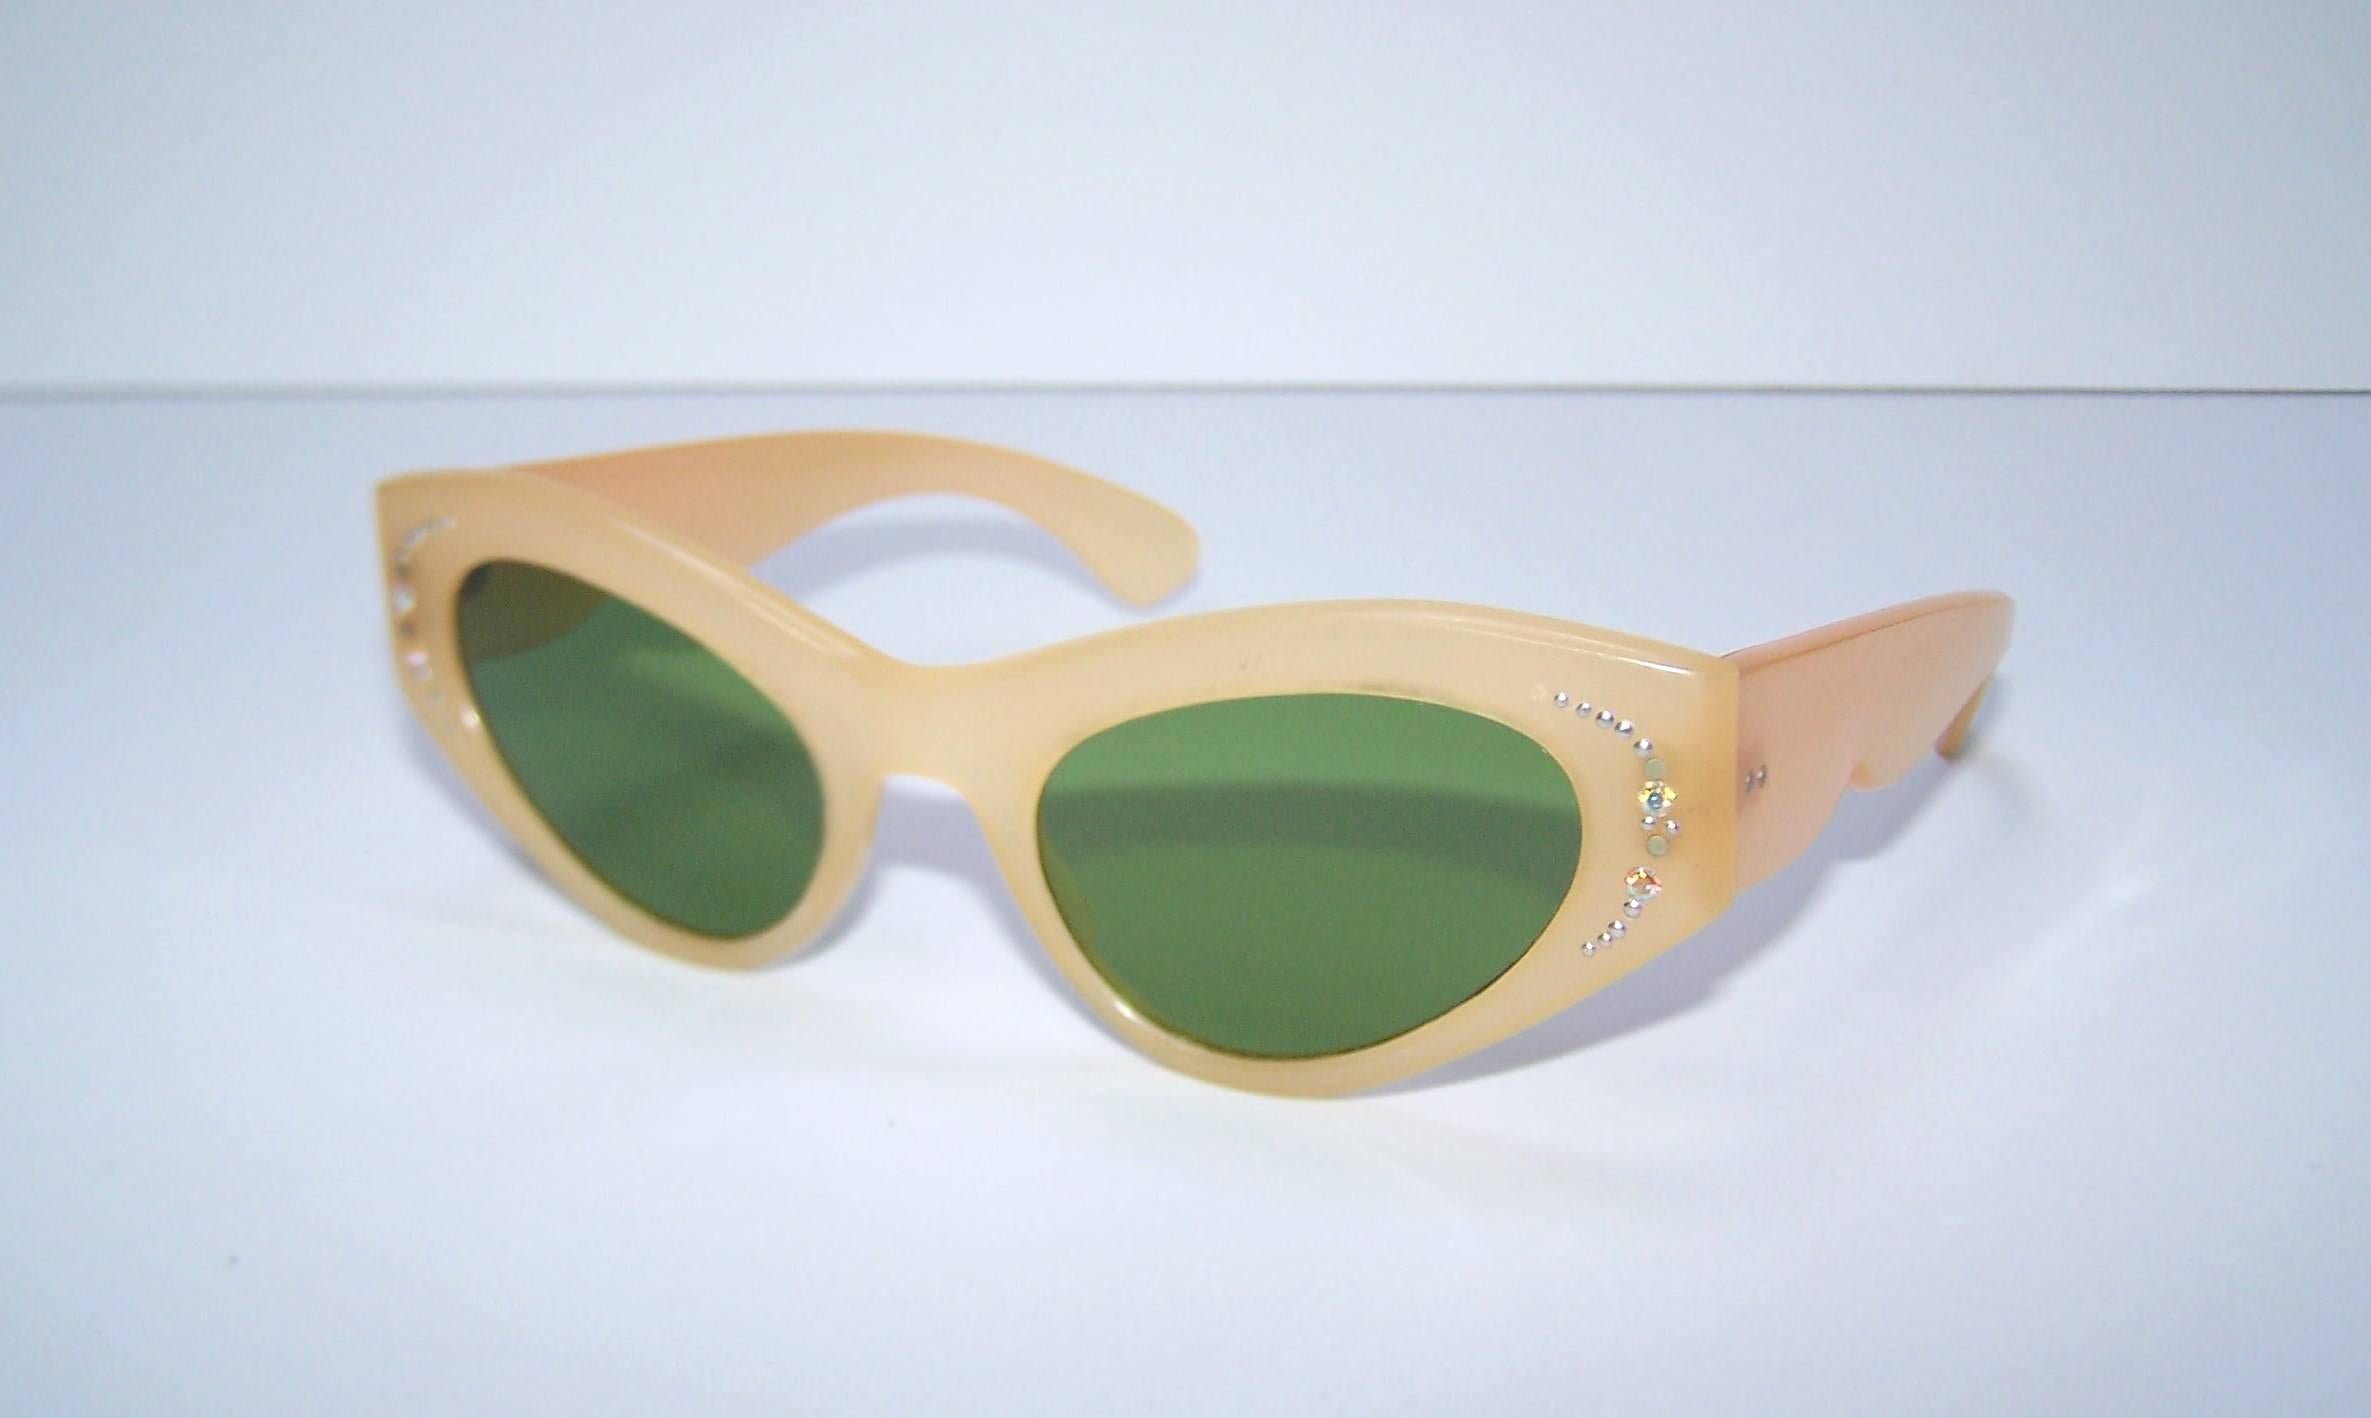 Don't forget your sunglasses when heading to the Riviera...the Italian Riviera in the 1950's, that is!  These classic cat eye sunglasses are a flesh tone or blonde frame with emerald green lenses and a little sparkle at the temples.  Marked 'Italy'